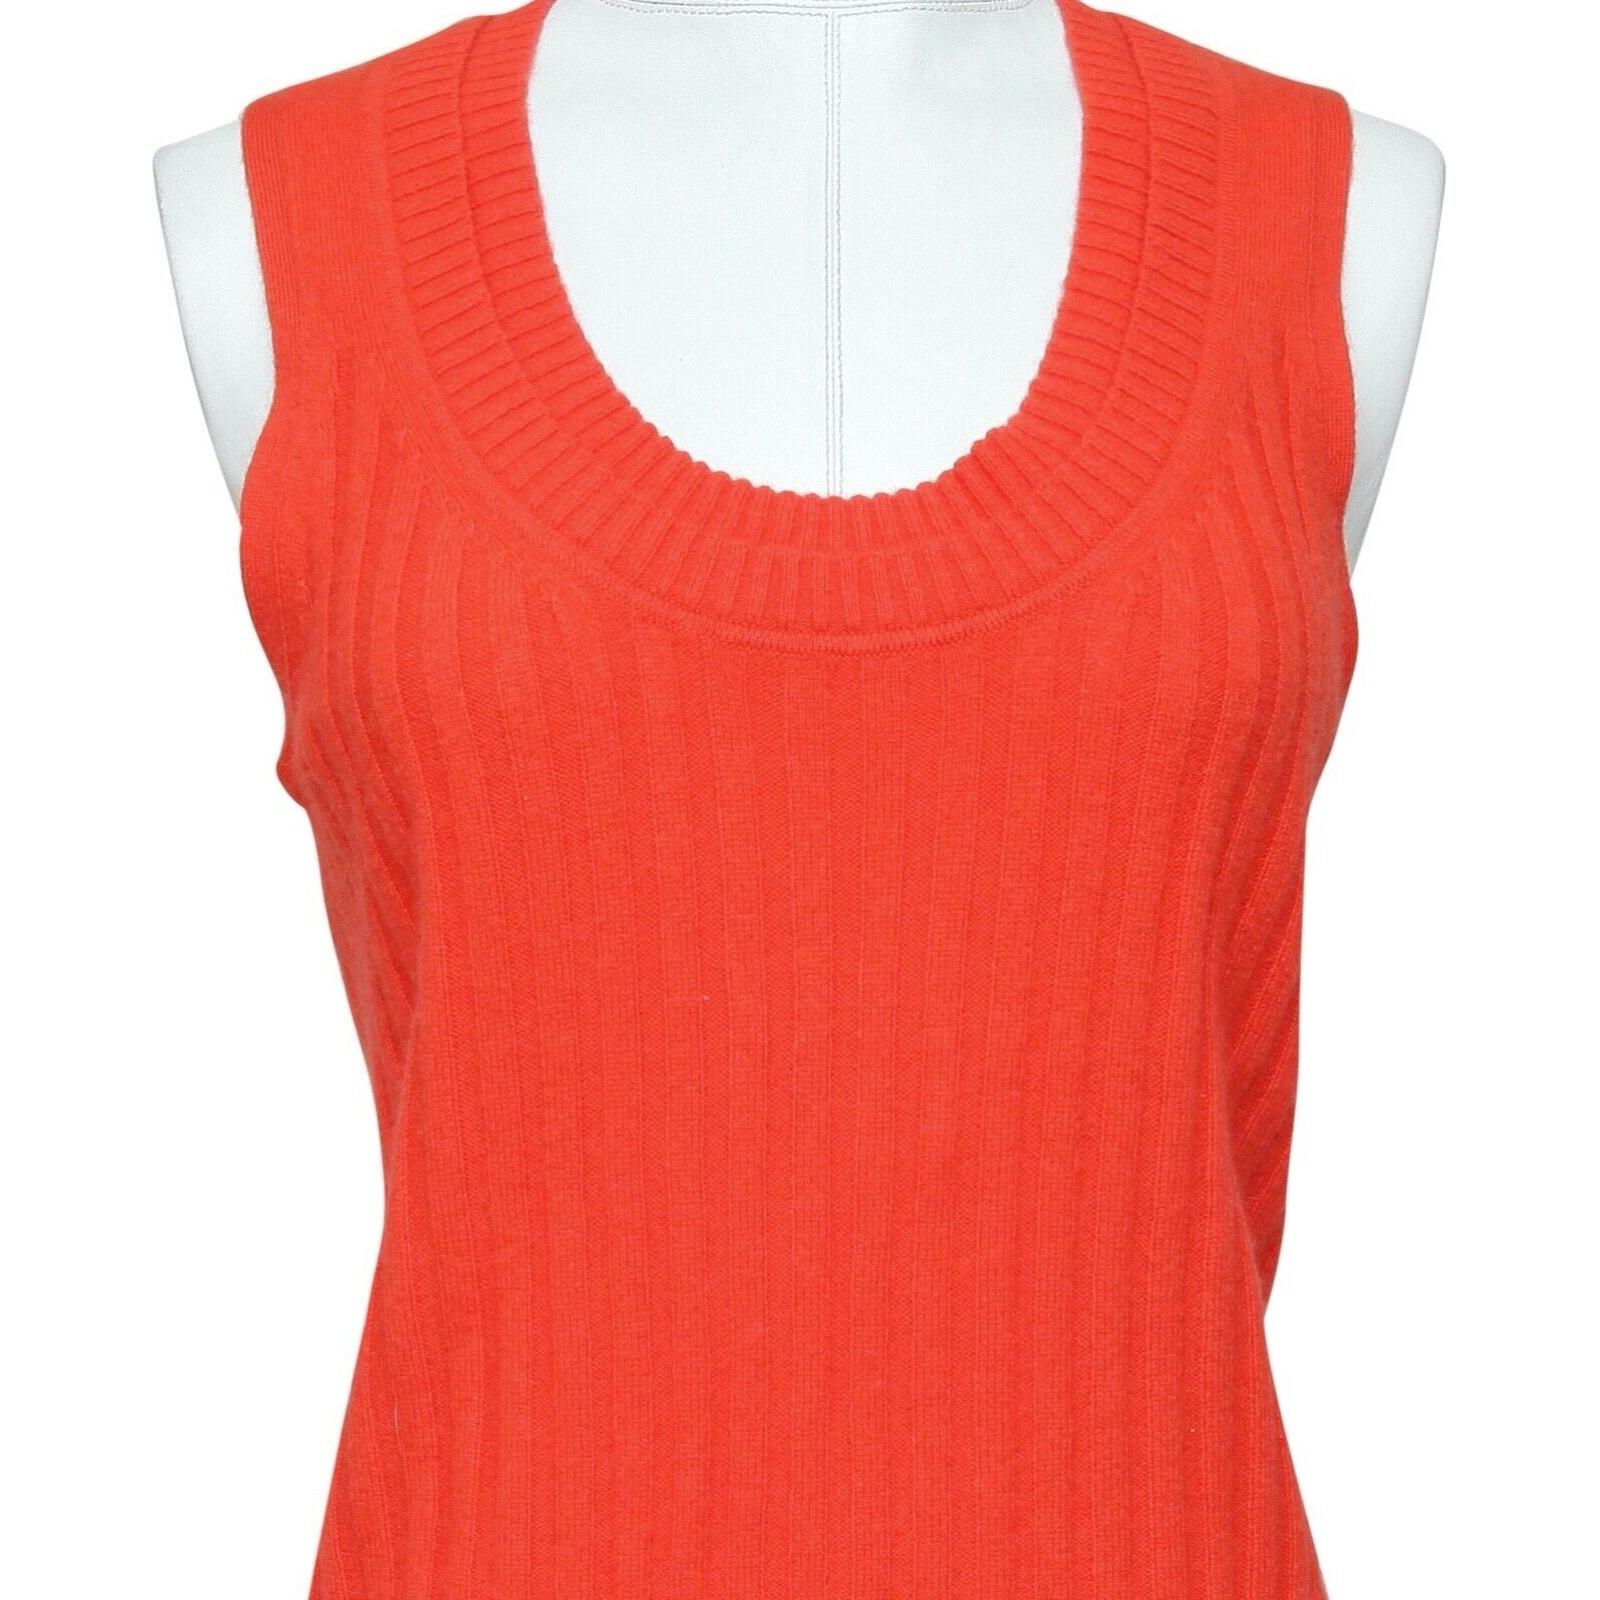 3.1 PHILLIP LIM Orange Sweater Knit Sleeveless Scoop Neck Ribbed Cashmere L NWT For Sale 1